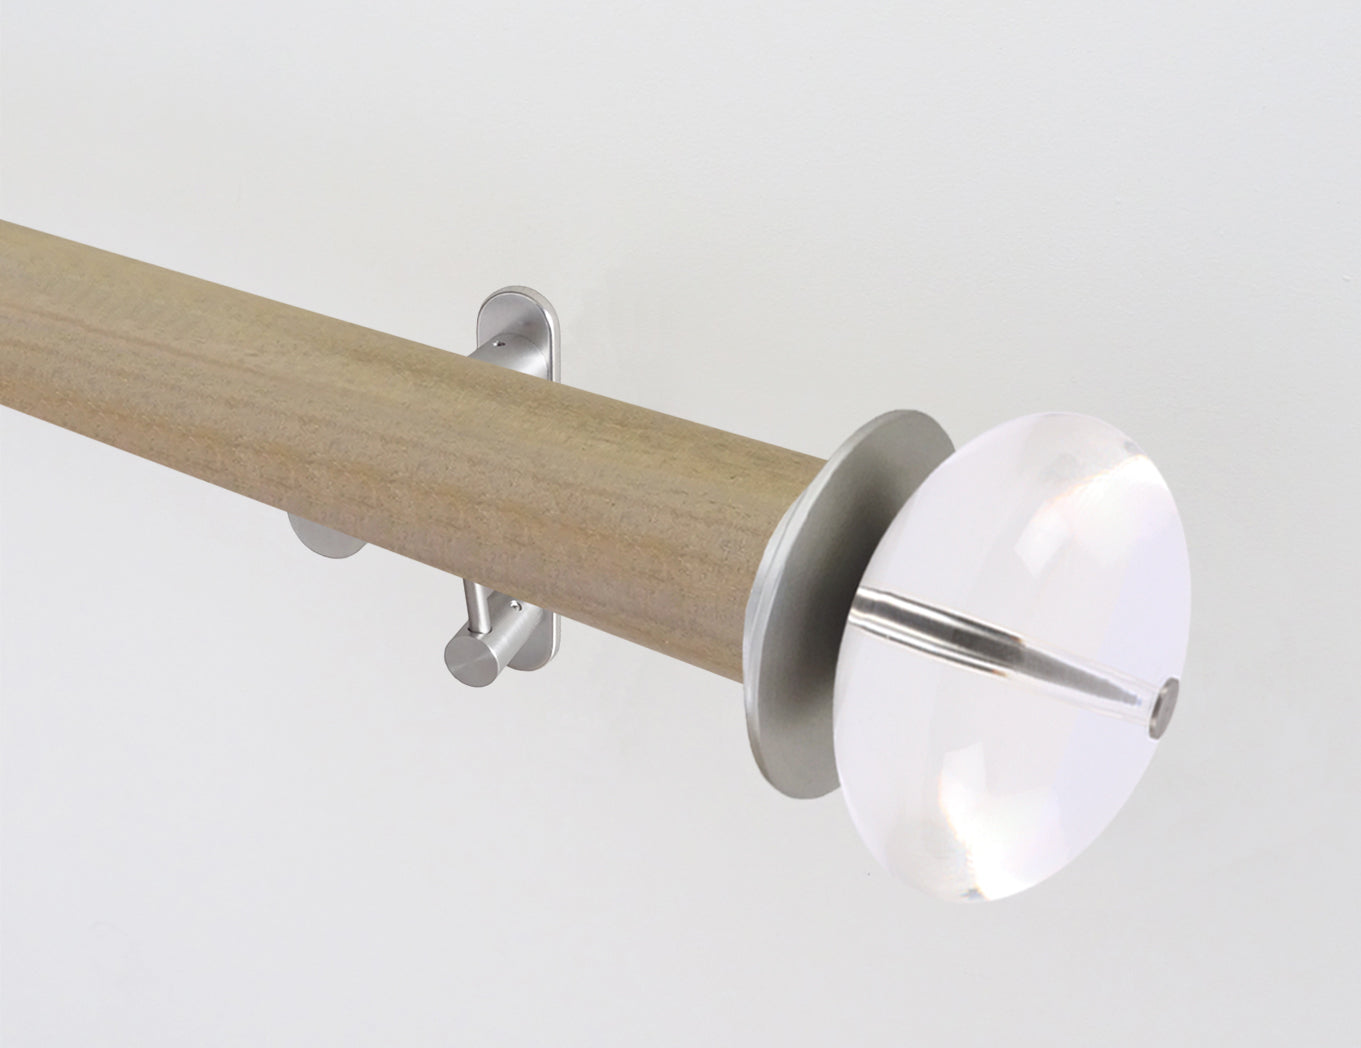 50mm dia. cotswold oak stained wood curtain pole with acrylic ball finials and brackets